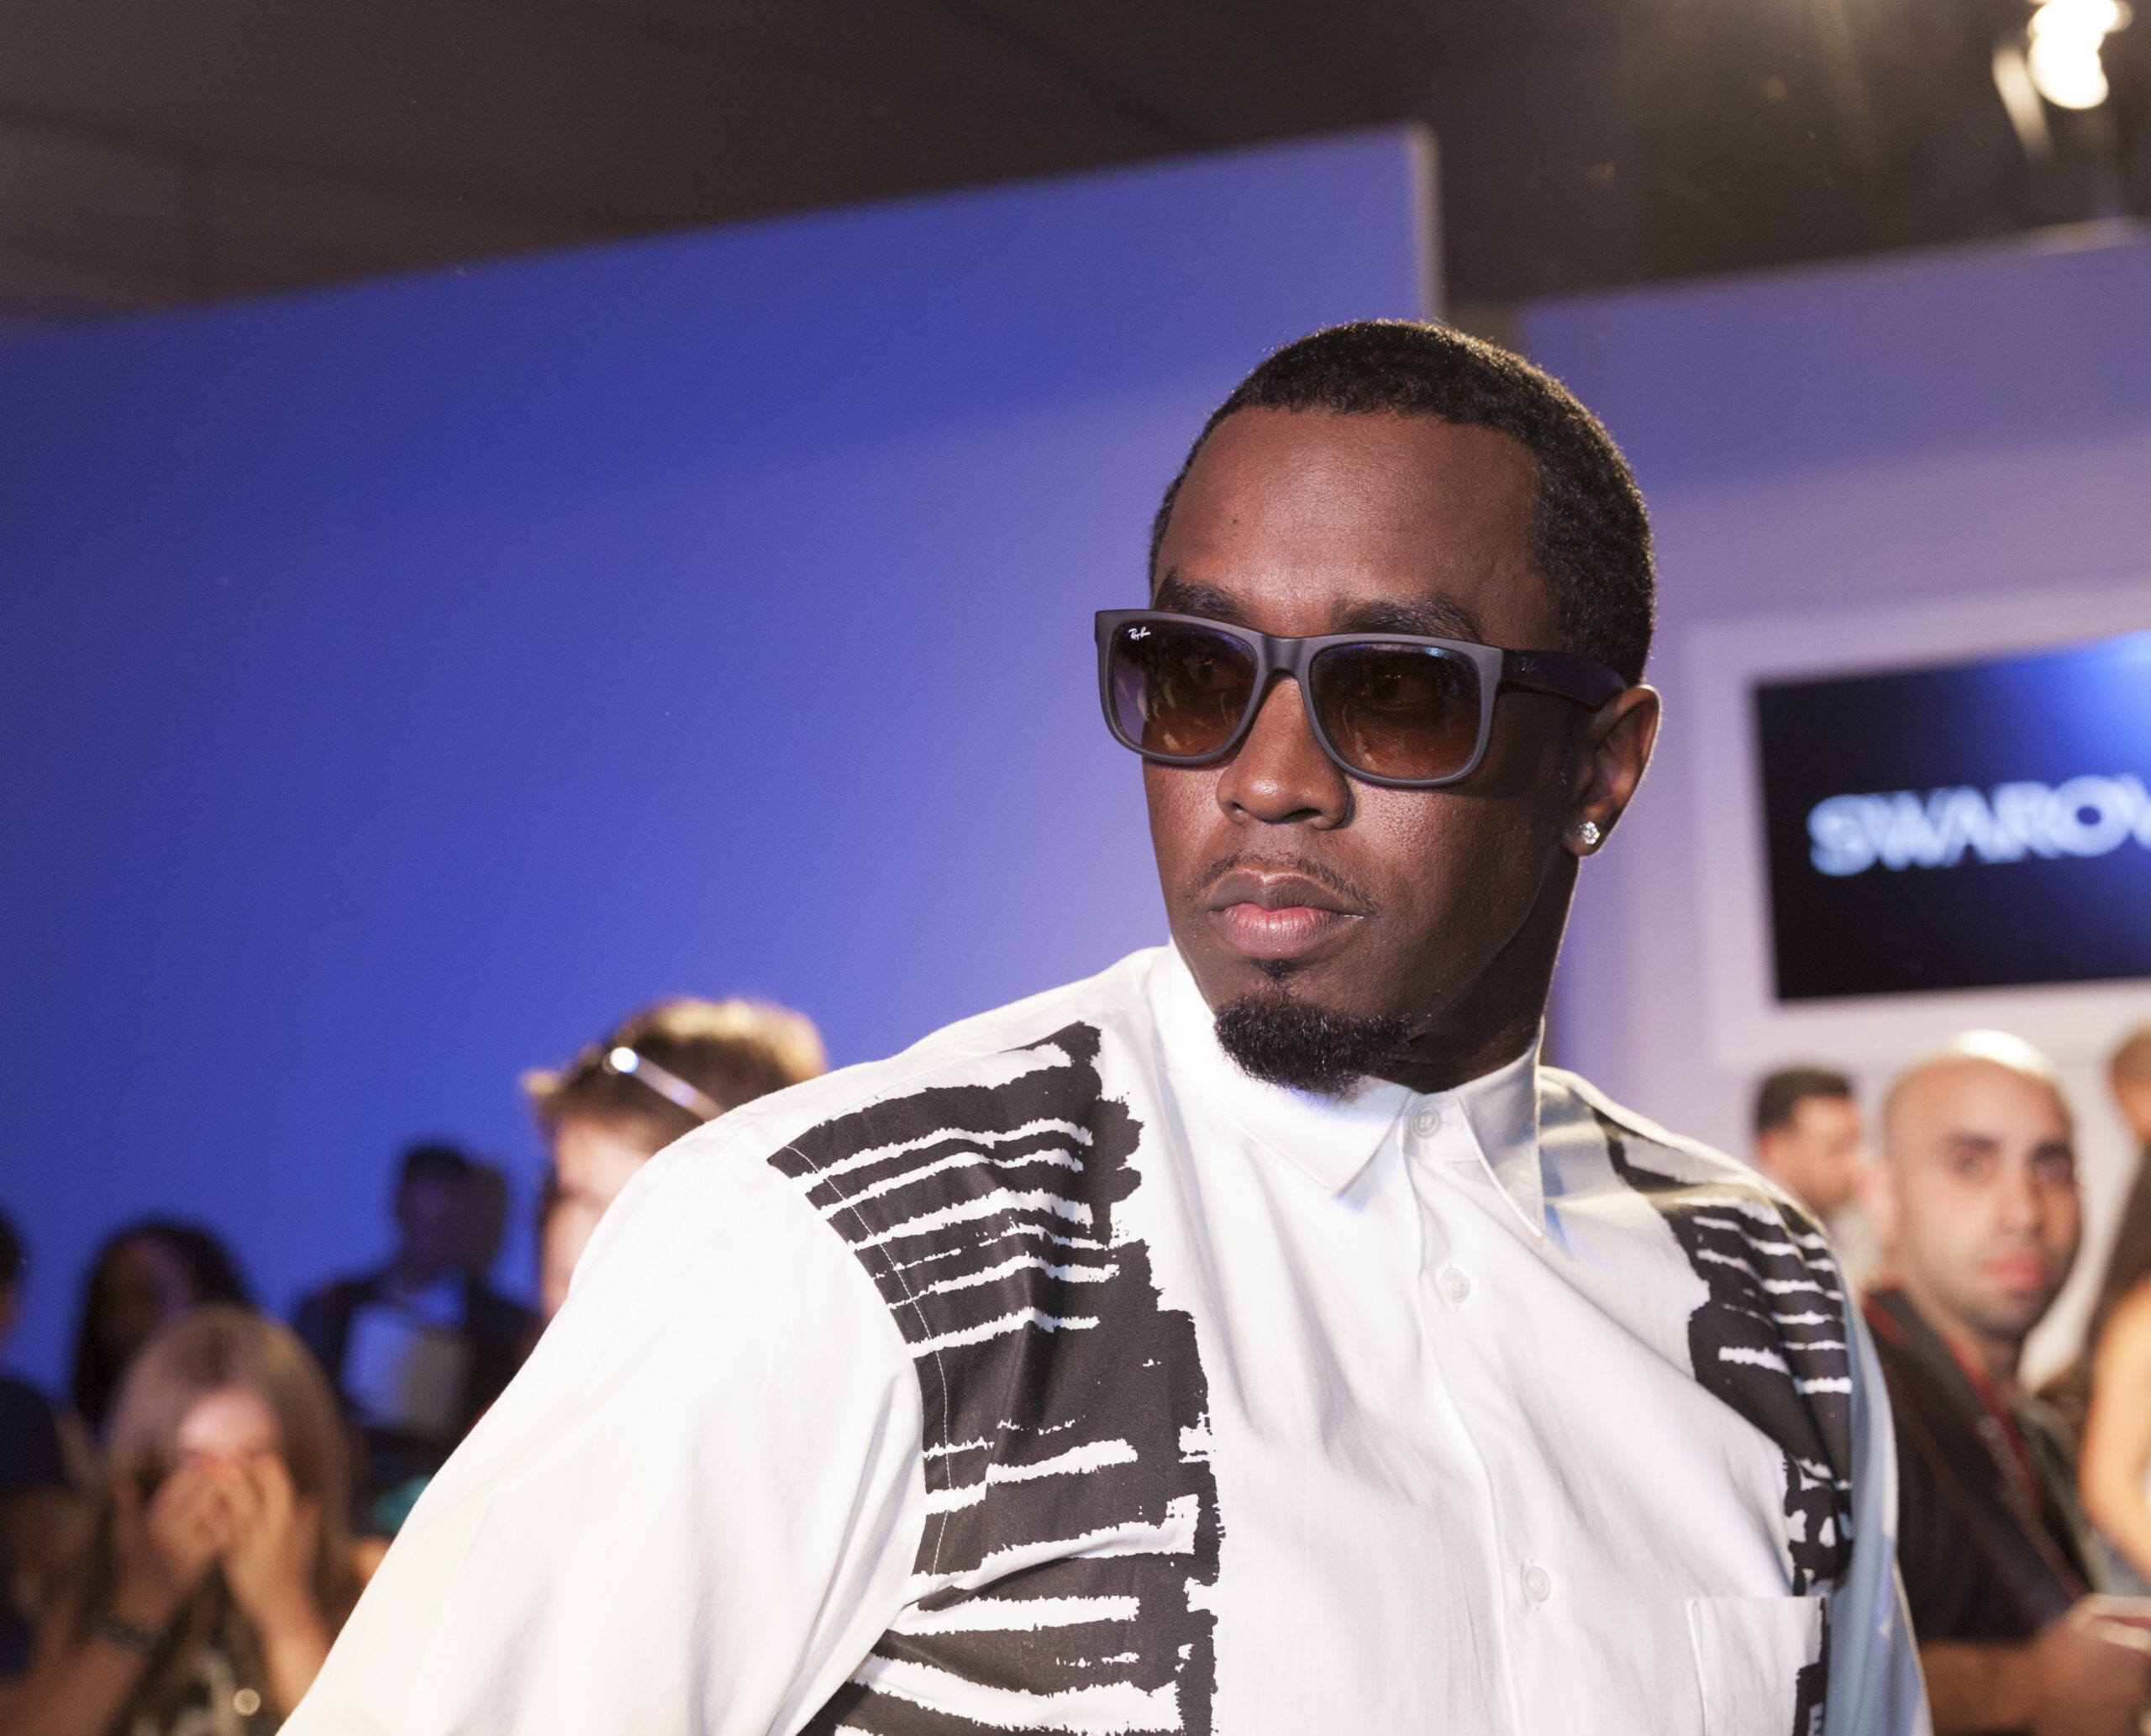 NEW YORK - OCTOBER 5: Sean John Combs P Daddy attends Swarovski show at Vogue Bambini petiteParade Kids Fashion Week at Industrial Superstudio on October 5, 2013 in New York City